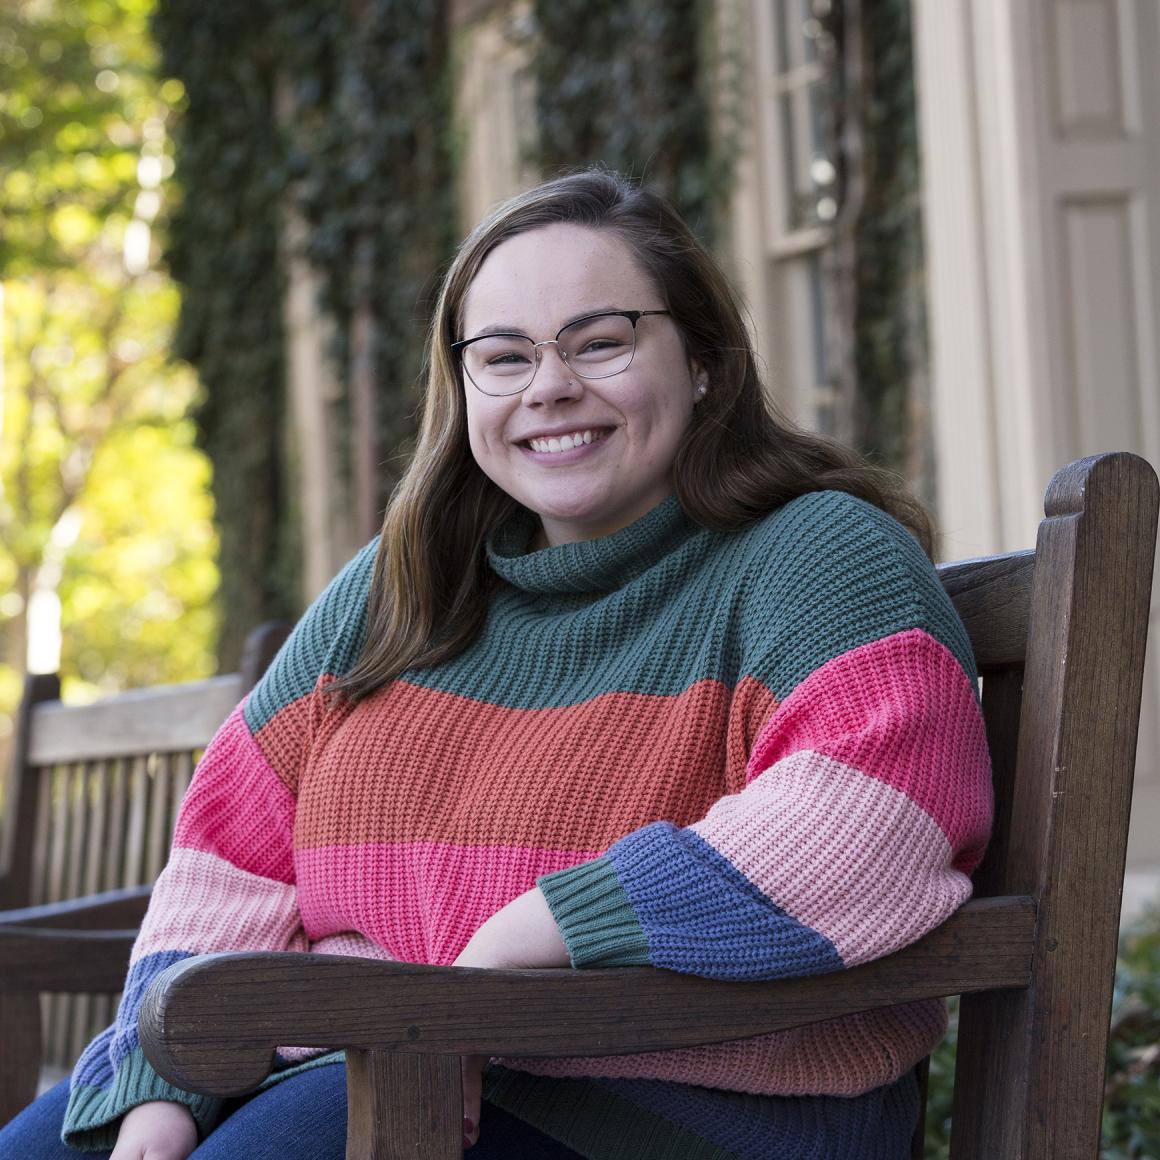 Danya Valek '20 seated in front of Princeton campus building